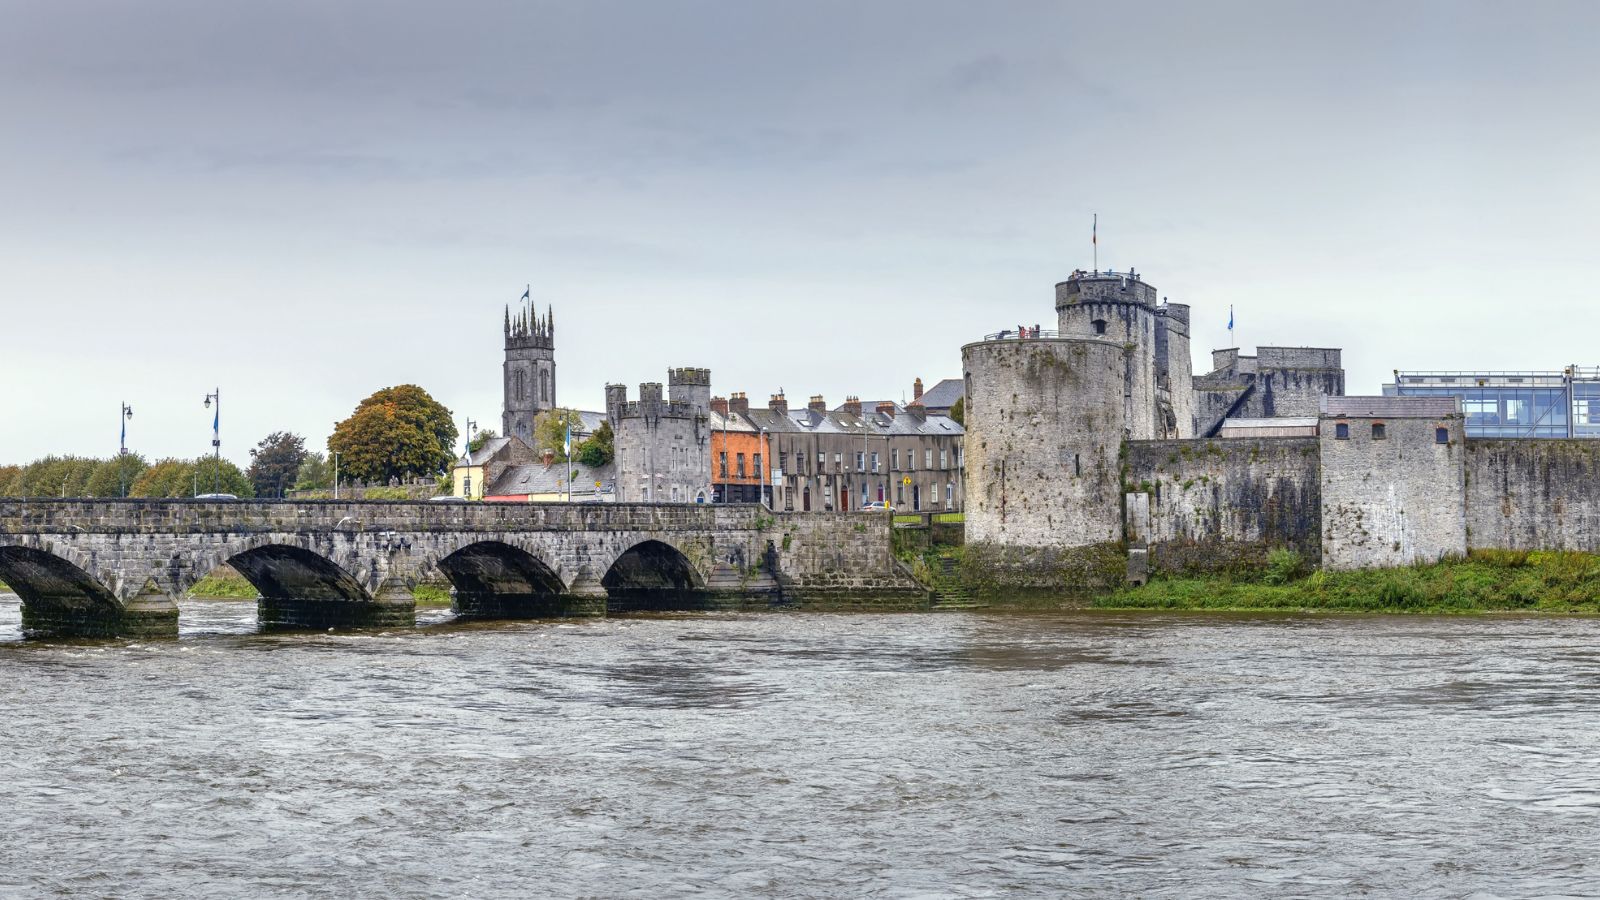 <p>Built by the villain of Robin Hood himself around 1200, King John’s Castle sits on the banks of the River Shannon. It remains in excellent shape to this day, dominating the town of Limerick.</p><p>The entire complex is open to explore for one ticket price. Inside, expect to find historical reenactments, medieval courtyard games, and stunning views.</p><p>But the pièce de resistance is an immersive interactive exhibition that uses 3D models and touch screens to bring 800 years of history to life. Climb the castle towers for an unmatched view of Limerick City.</p>